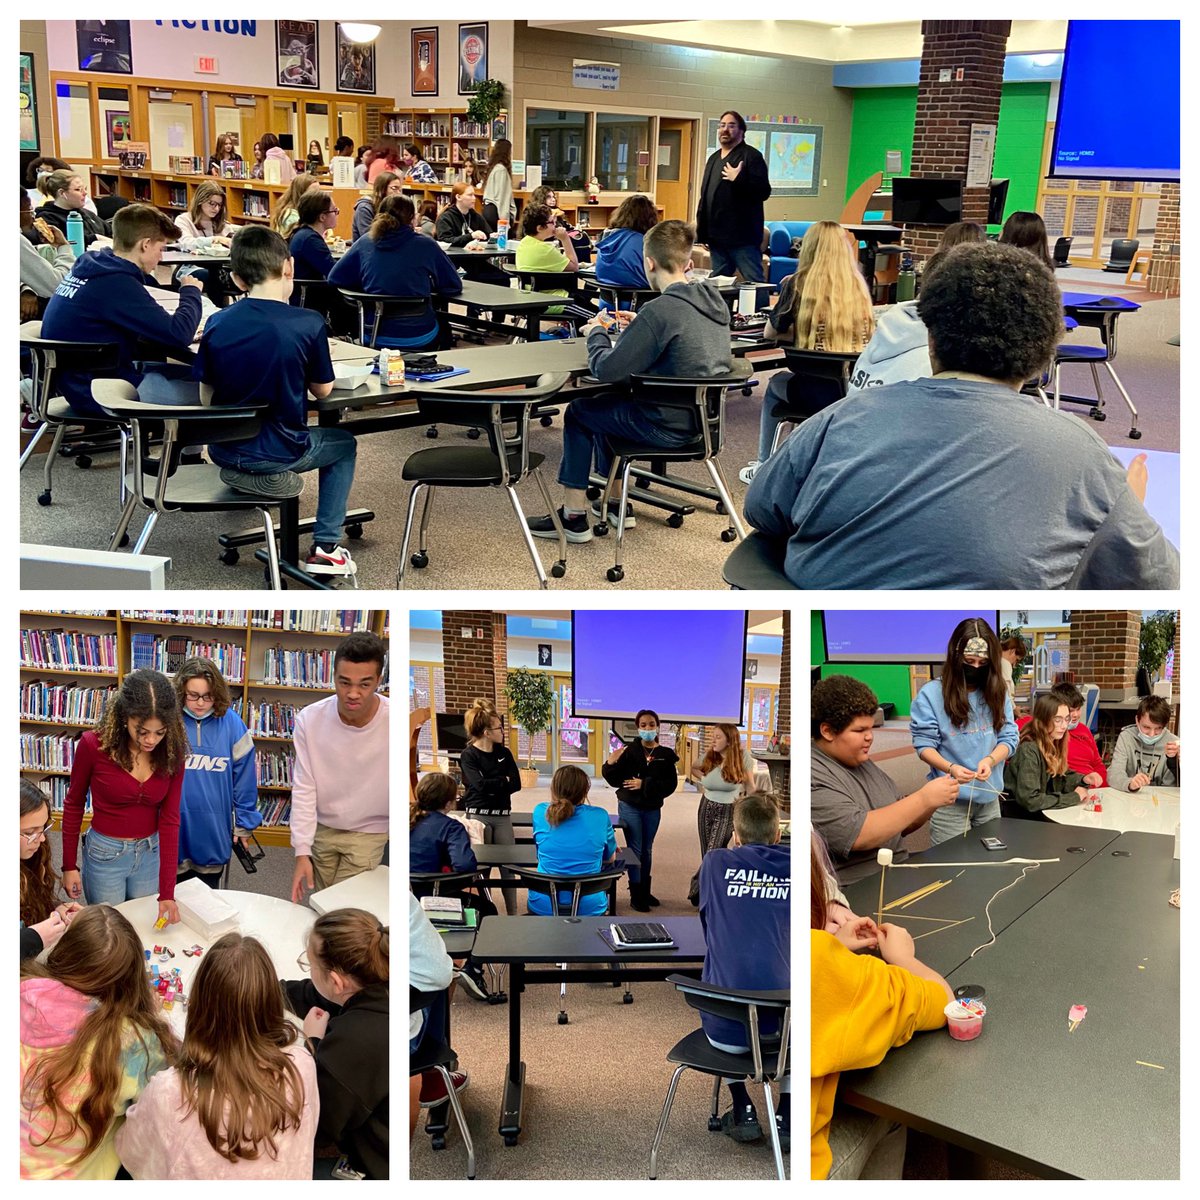 Marketing and DECA lunch n’ learn today @RMSNobleKnights. Thank you to @forlinimarketi1 and your students for the informational and fun activities! The marshmallow tower building and dumpster dive activities were super fun for the 8th graders! @BrasureCTE #frasercte